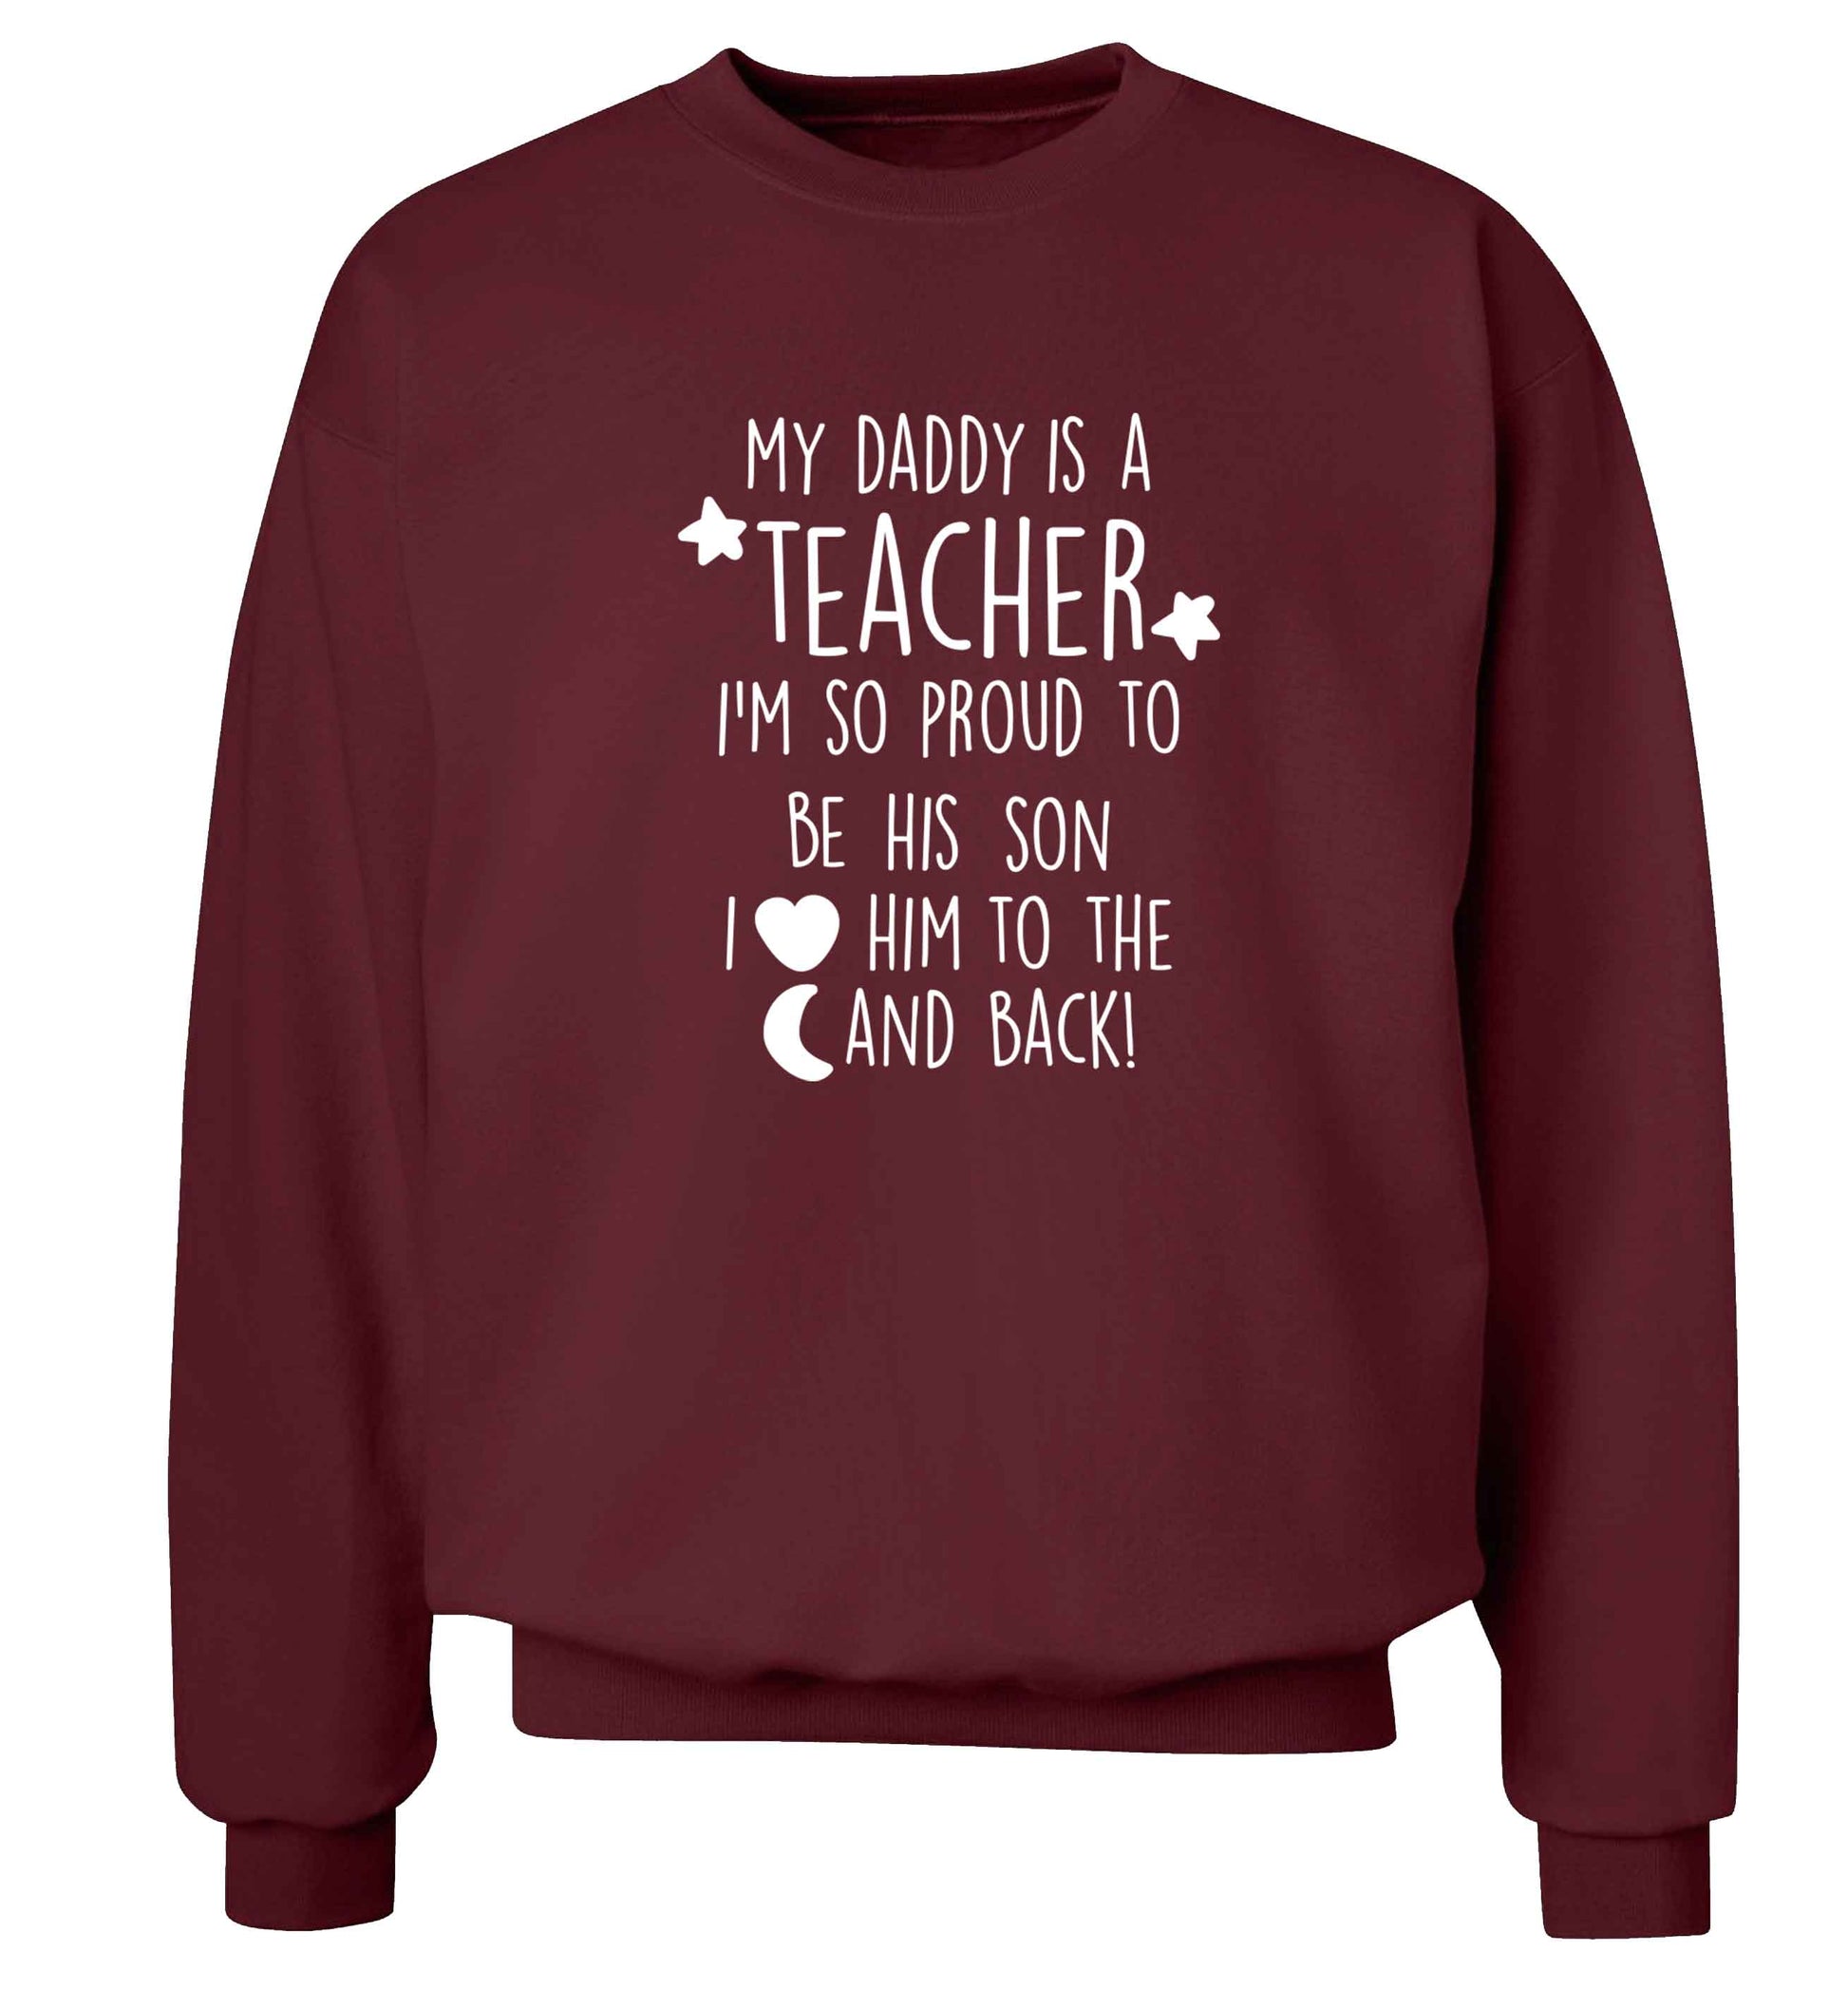 My daddy is a teacher I'm so proud to be his son I love her to the moon and back adult's unisex maroon sweater 2XL